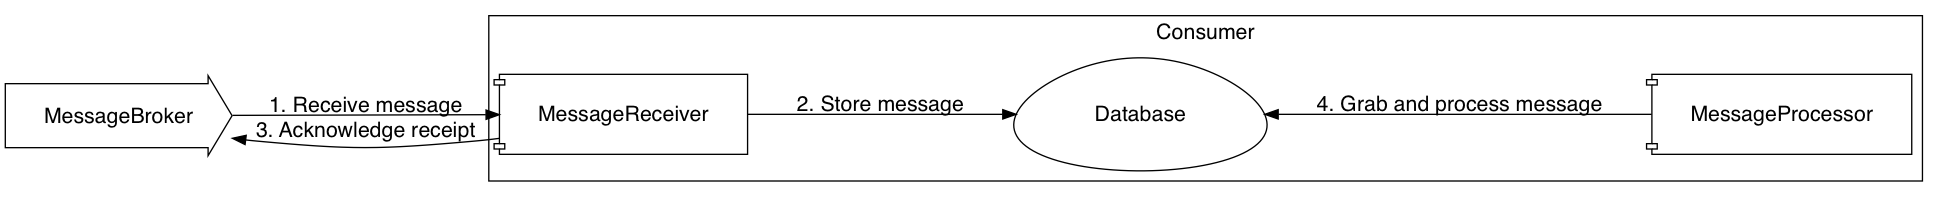 diagram showing queueing a received message, then processing it later